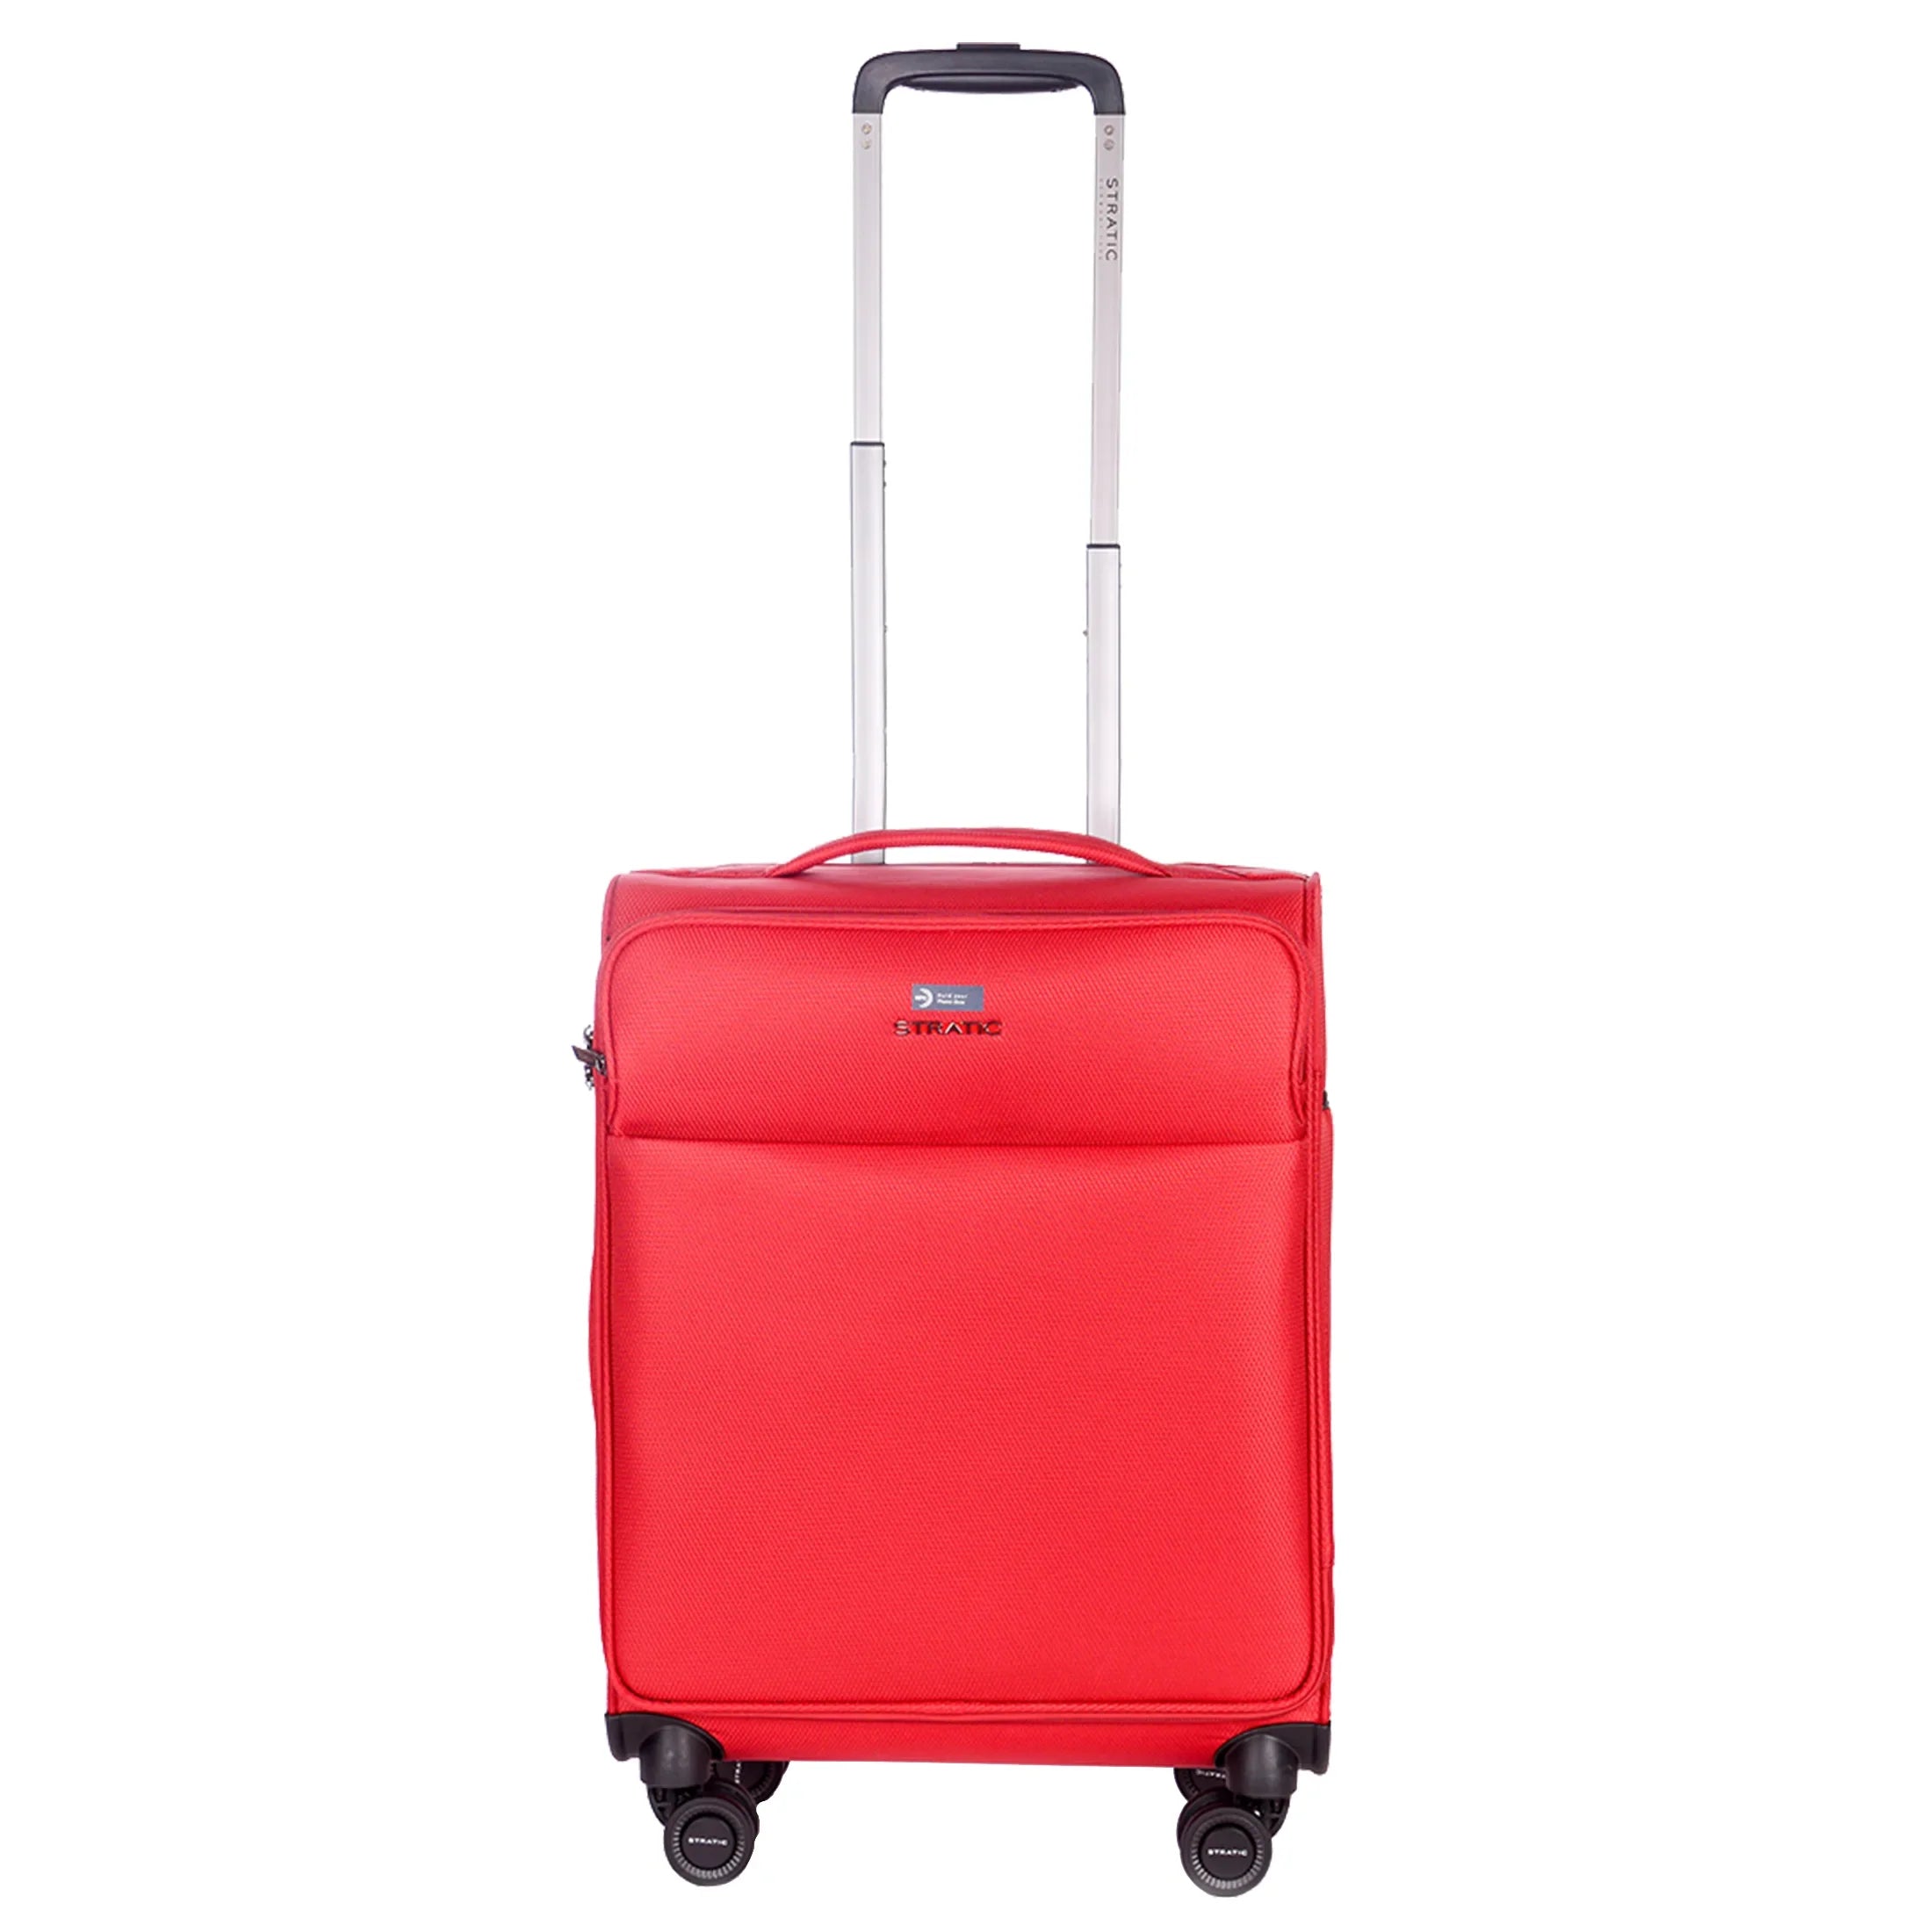 Stratic Light + Valise cabine 4 roues 55 cm - Rouge